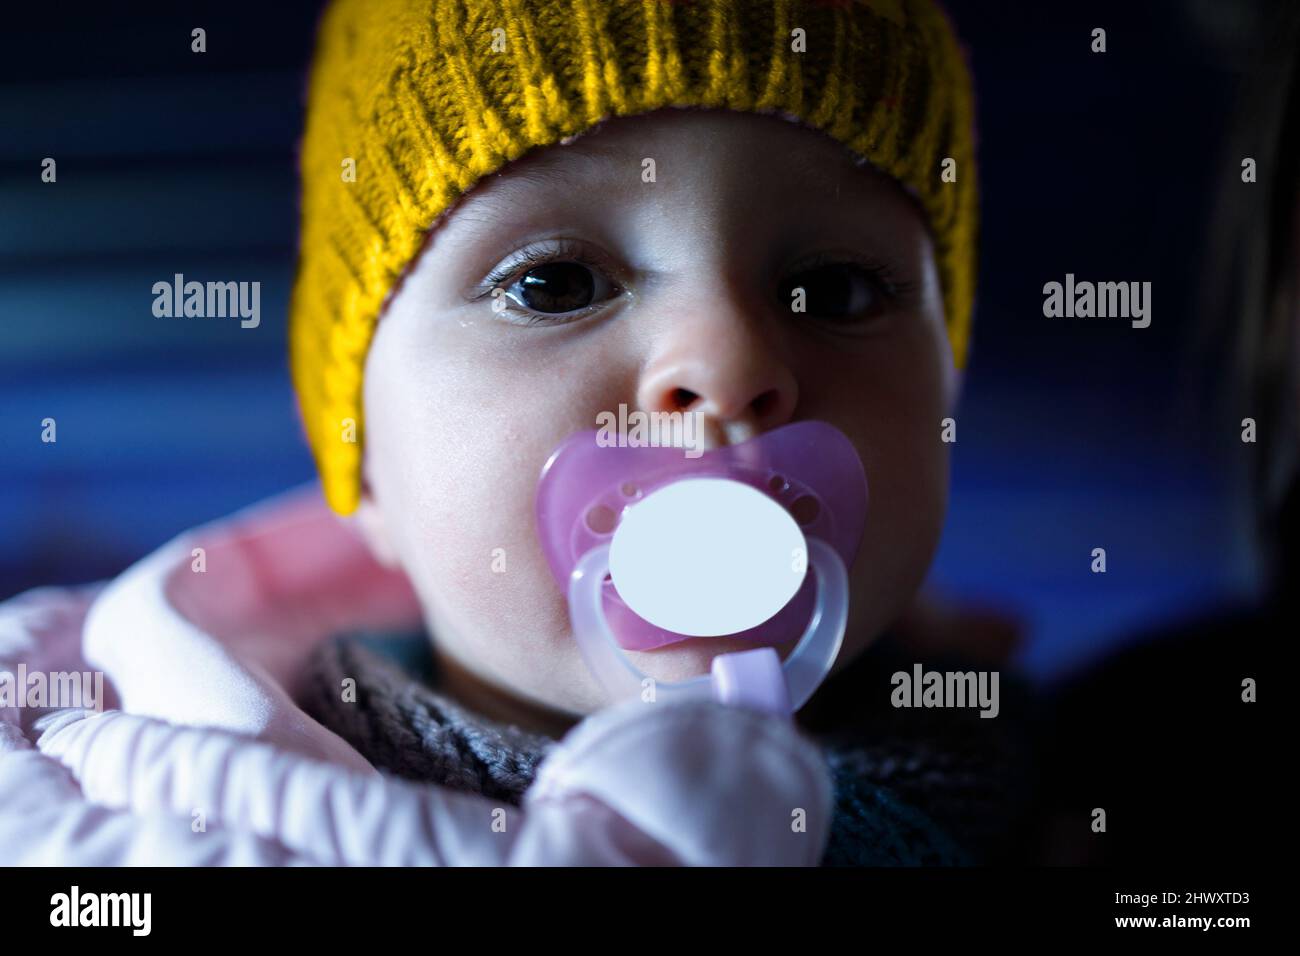 An innocent child looking fearfully into the camera Stock Photo